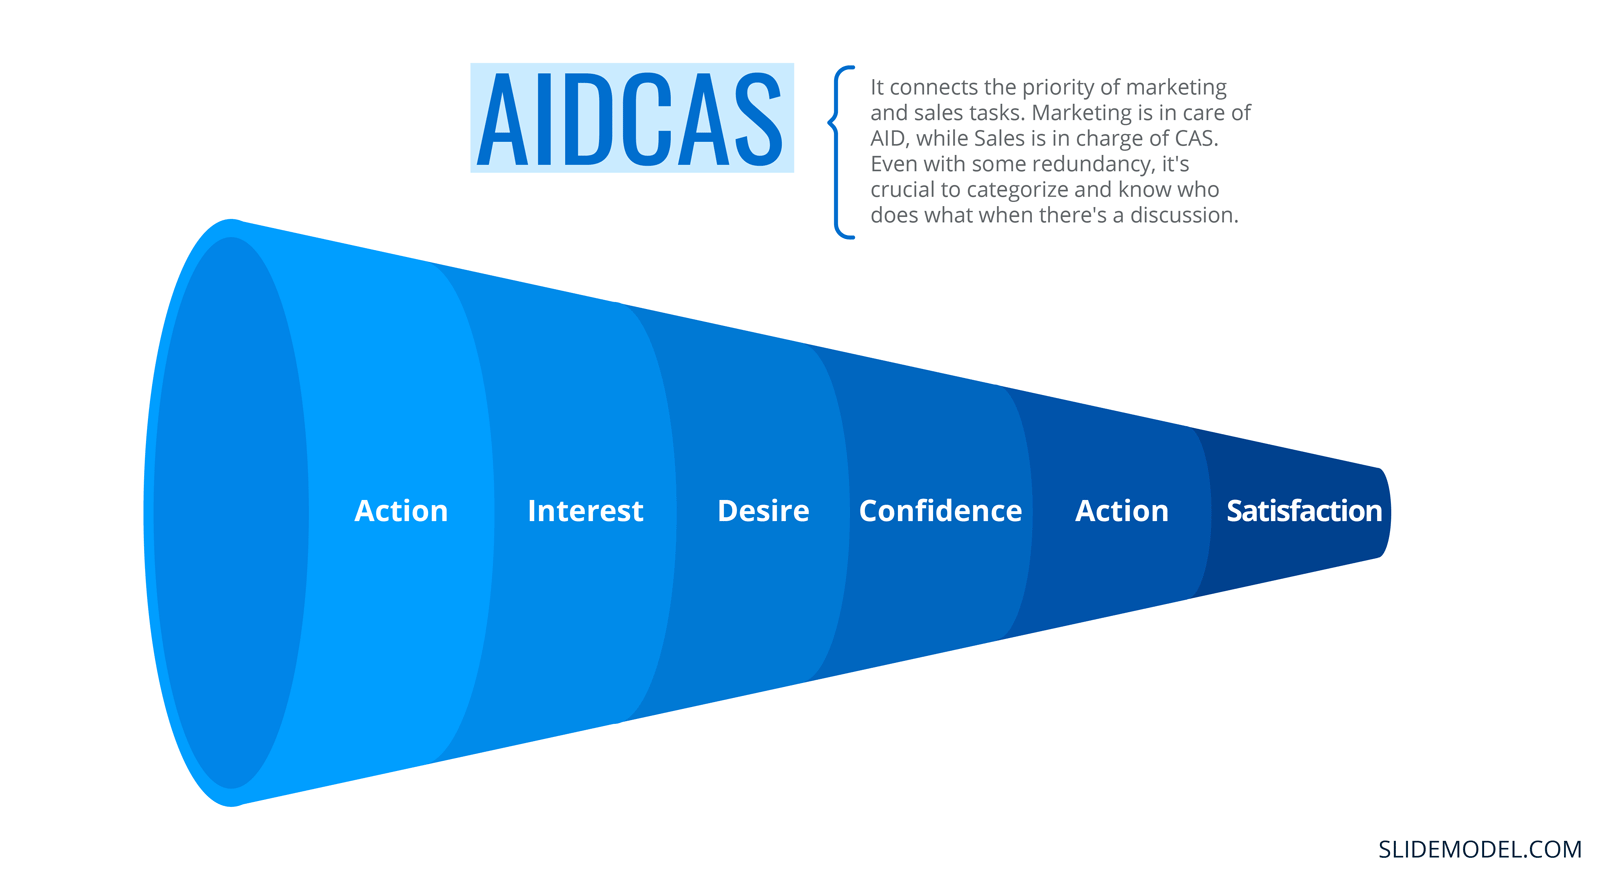 AIDCAS Model with 6 Stages